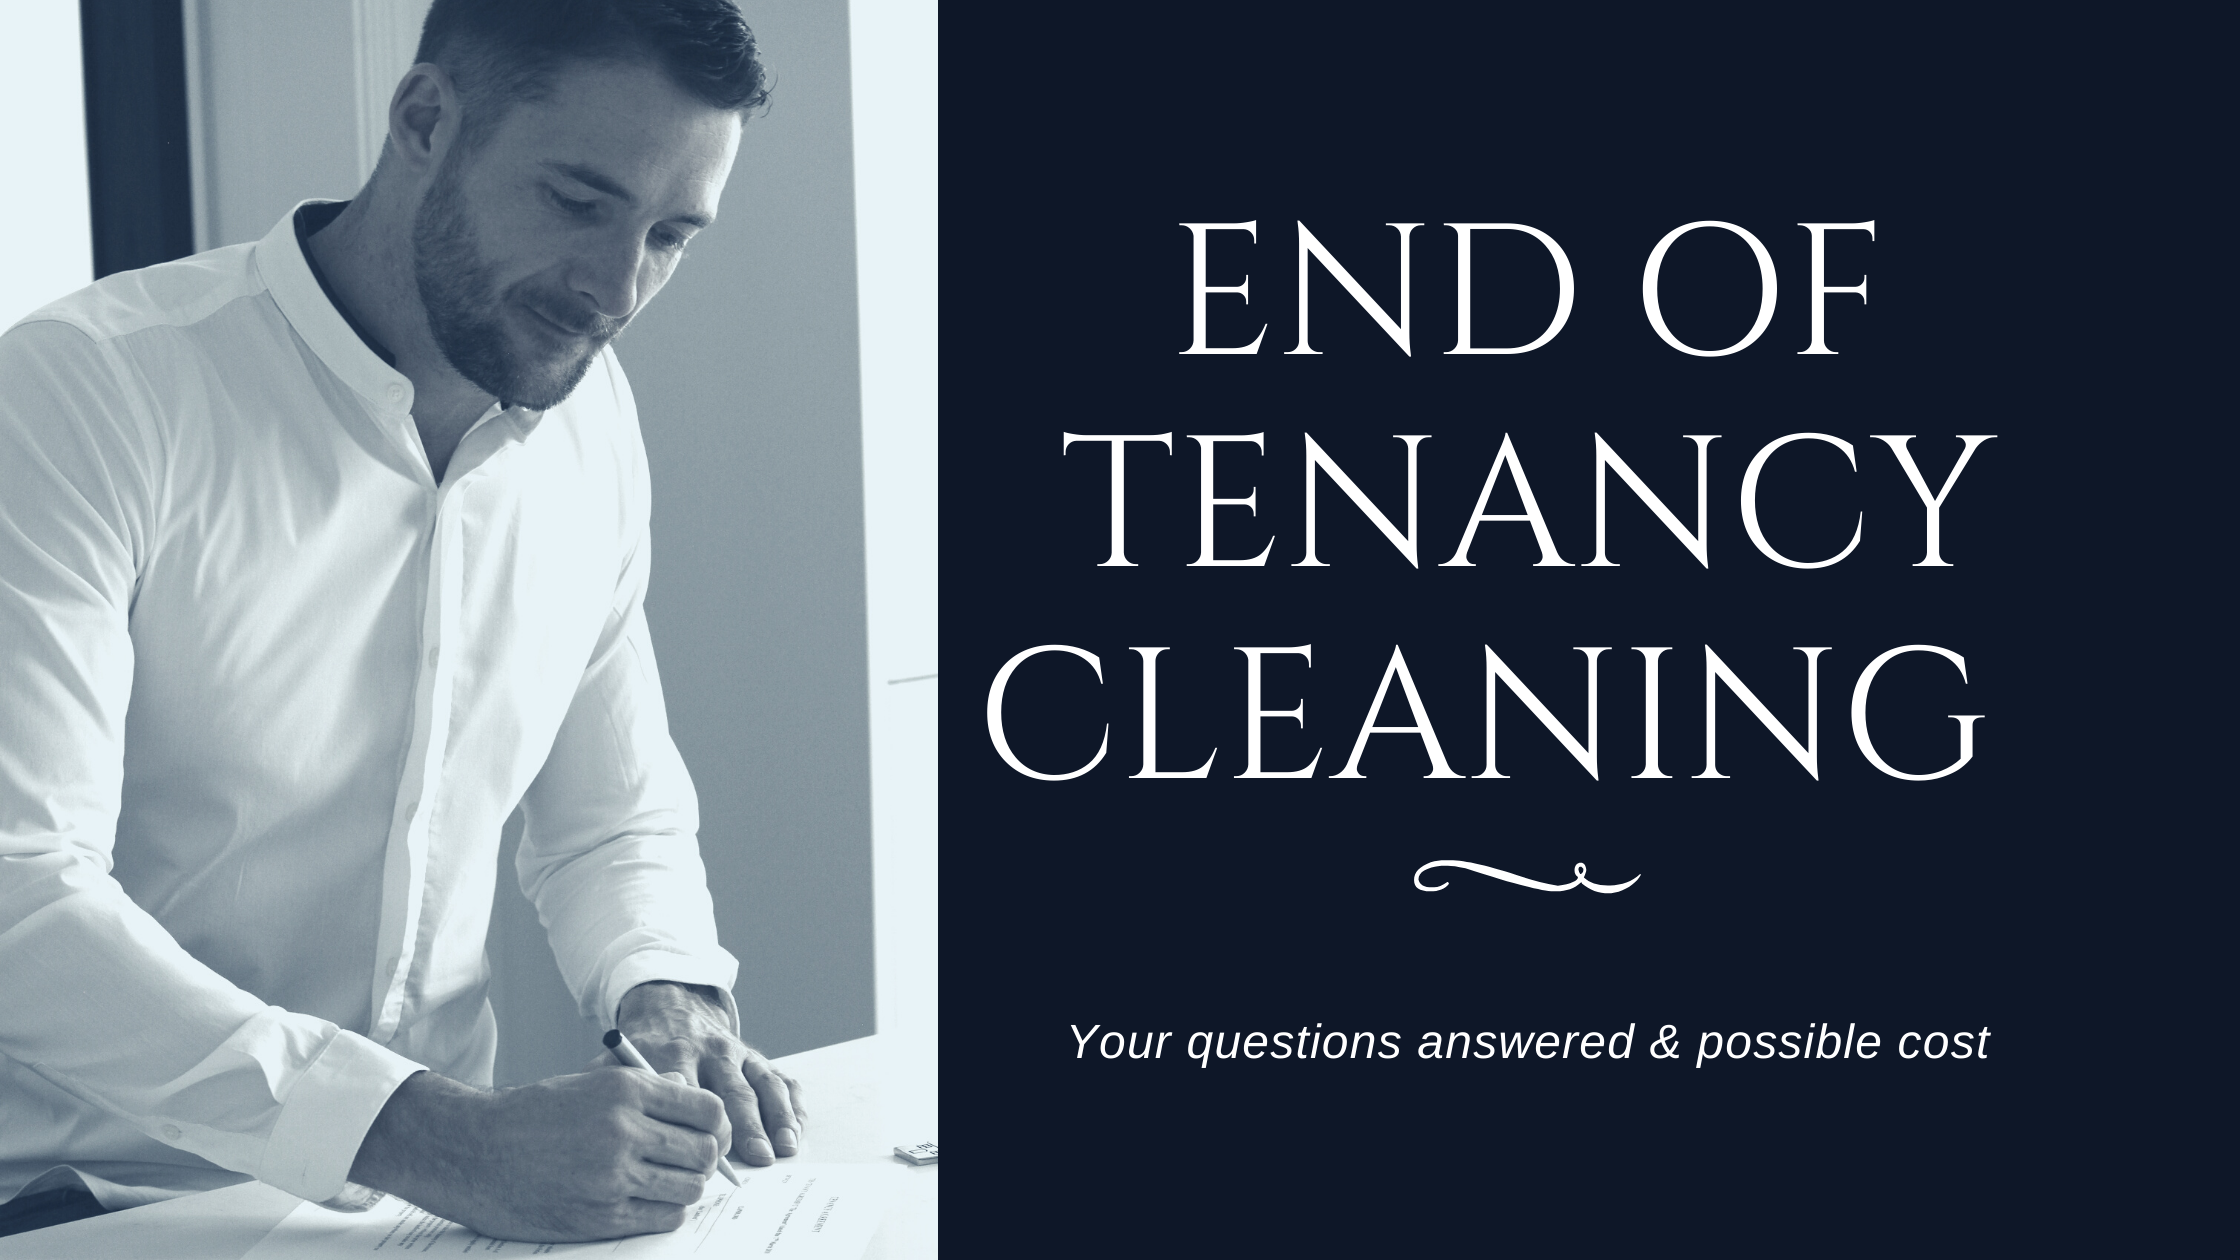 End of tenancy cleaning london cost